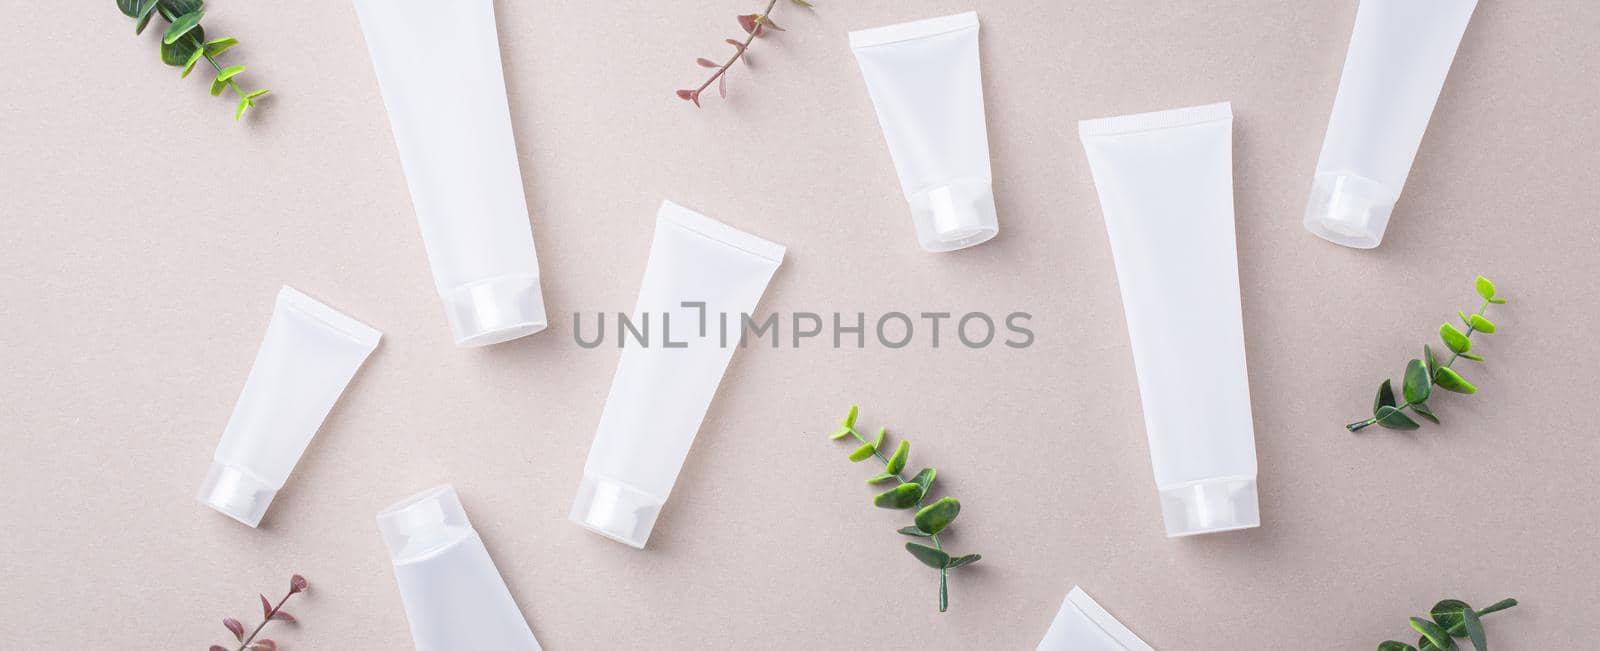 Skincare organic beauty product bottles, green plant leaves on gray background by its_al_dente